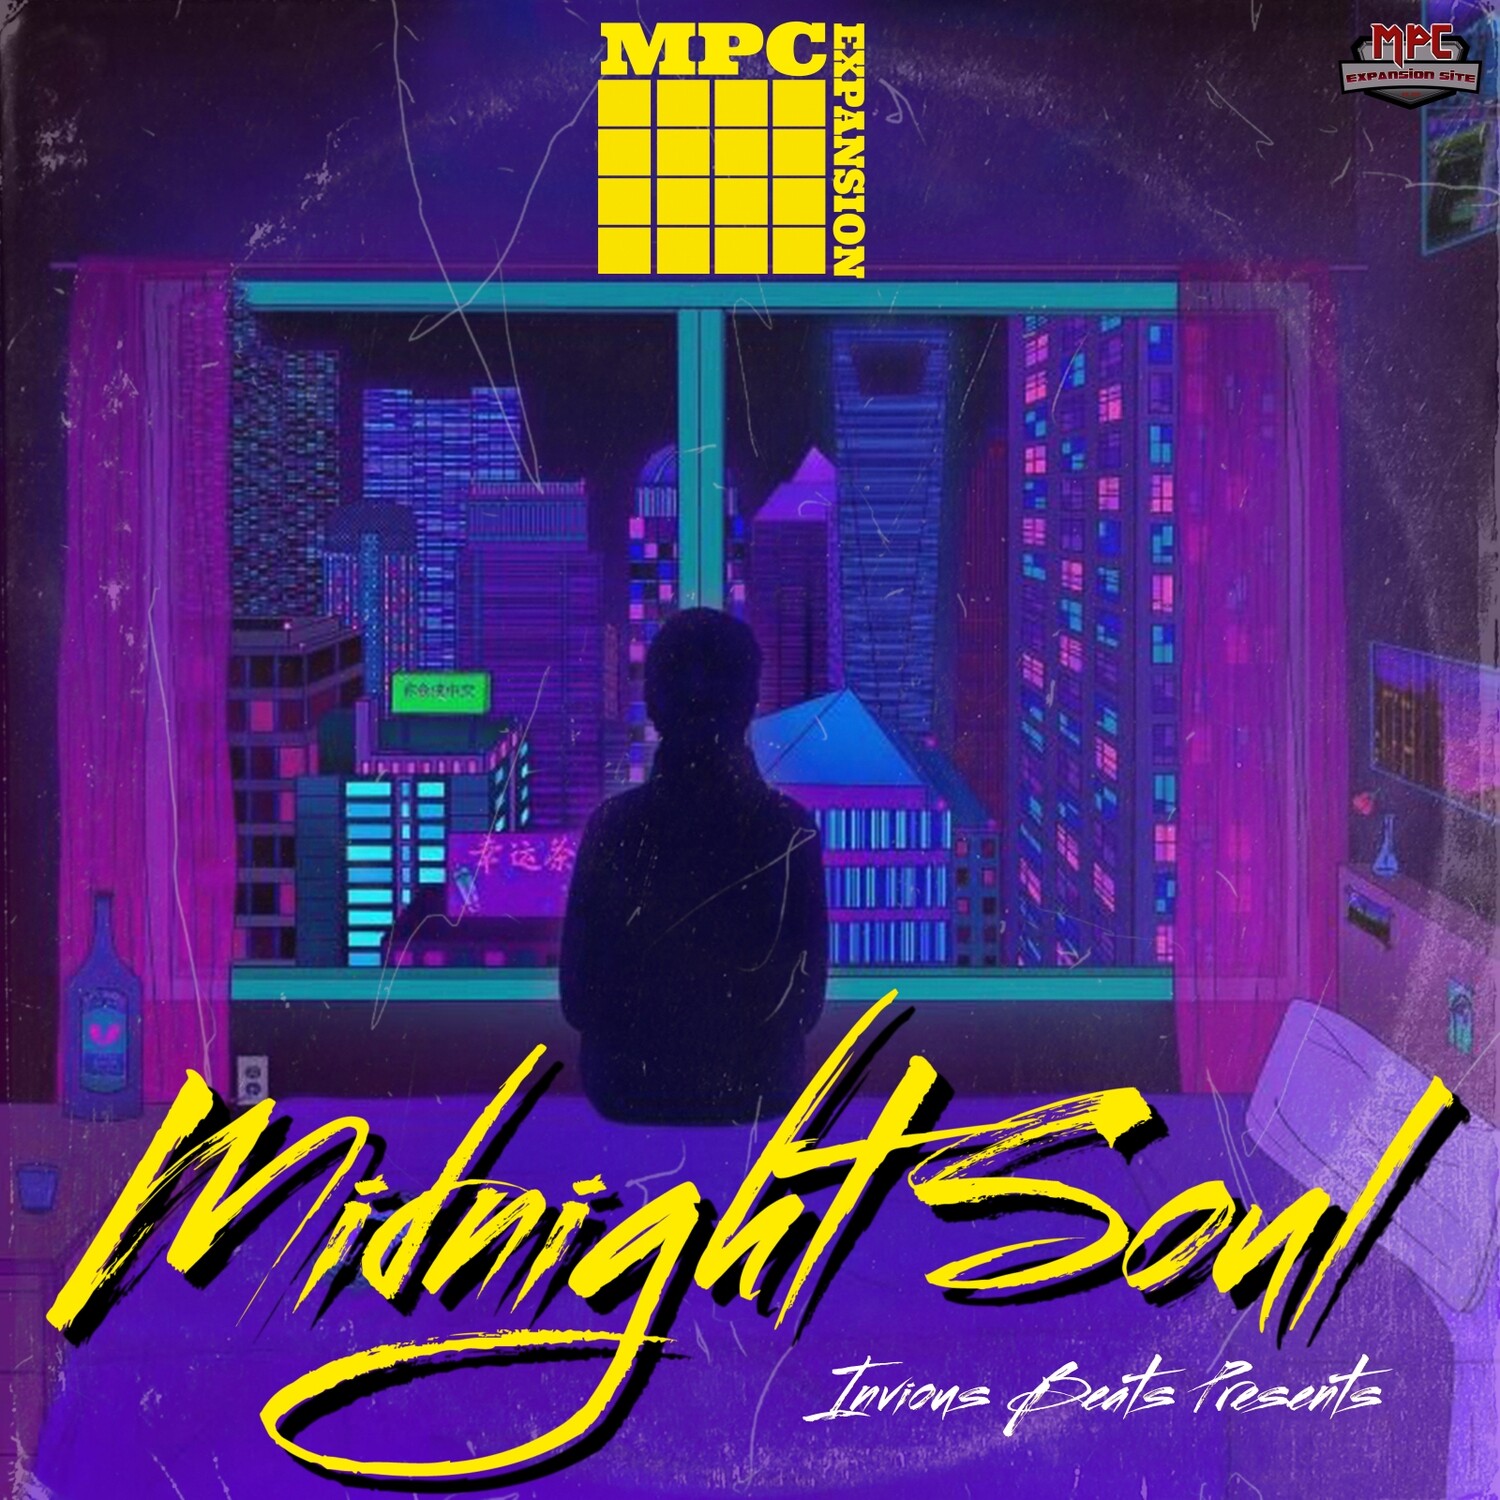 MPC EXPANSION 'MIDNIGHT SOUL' by INVIOUS